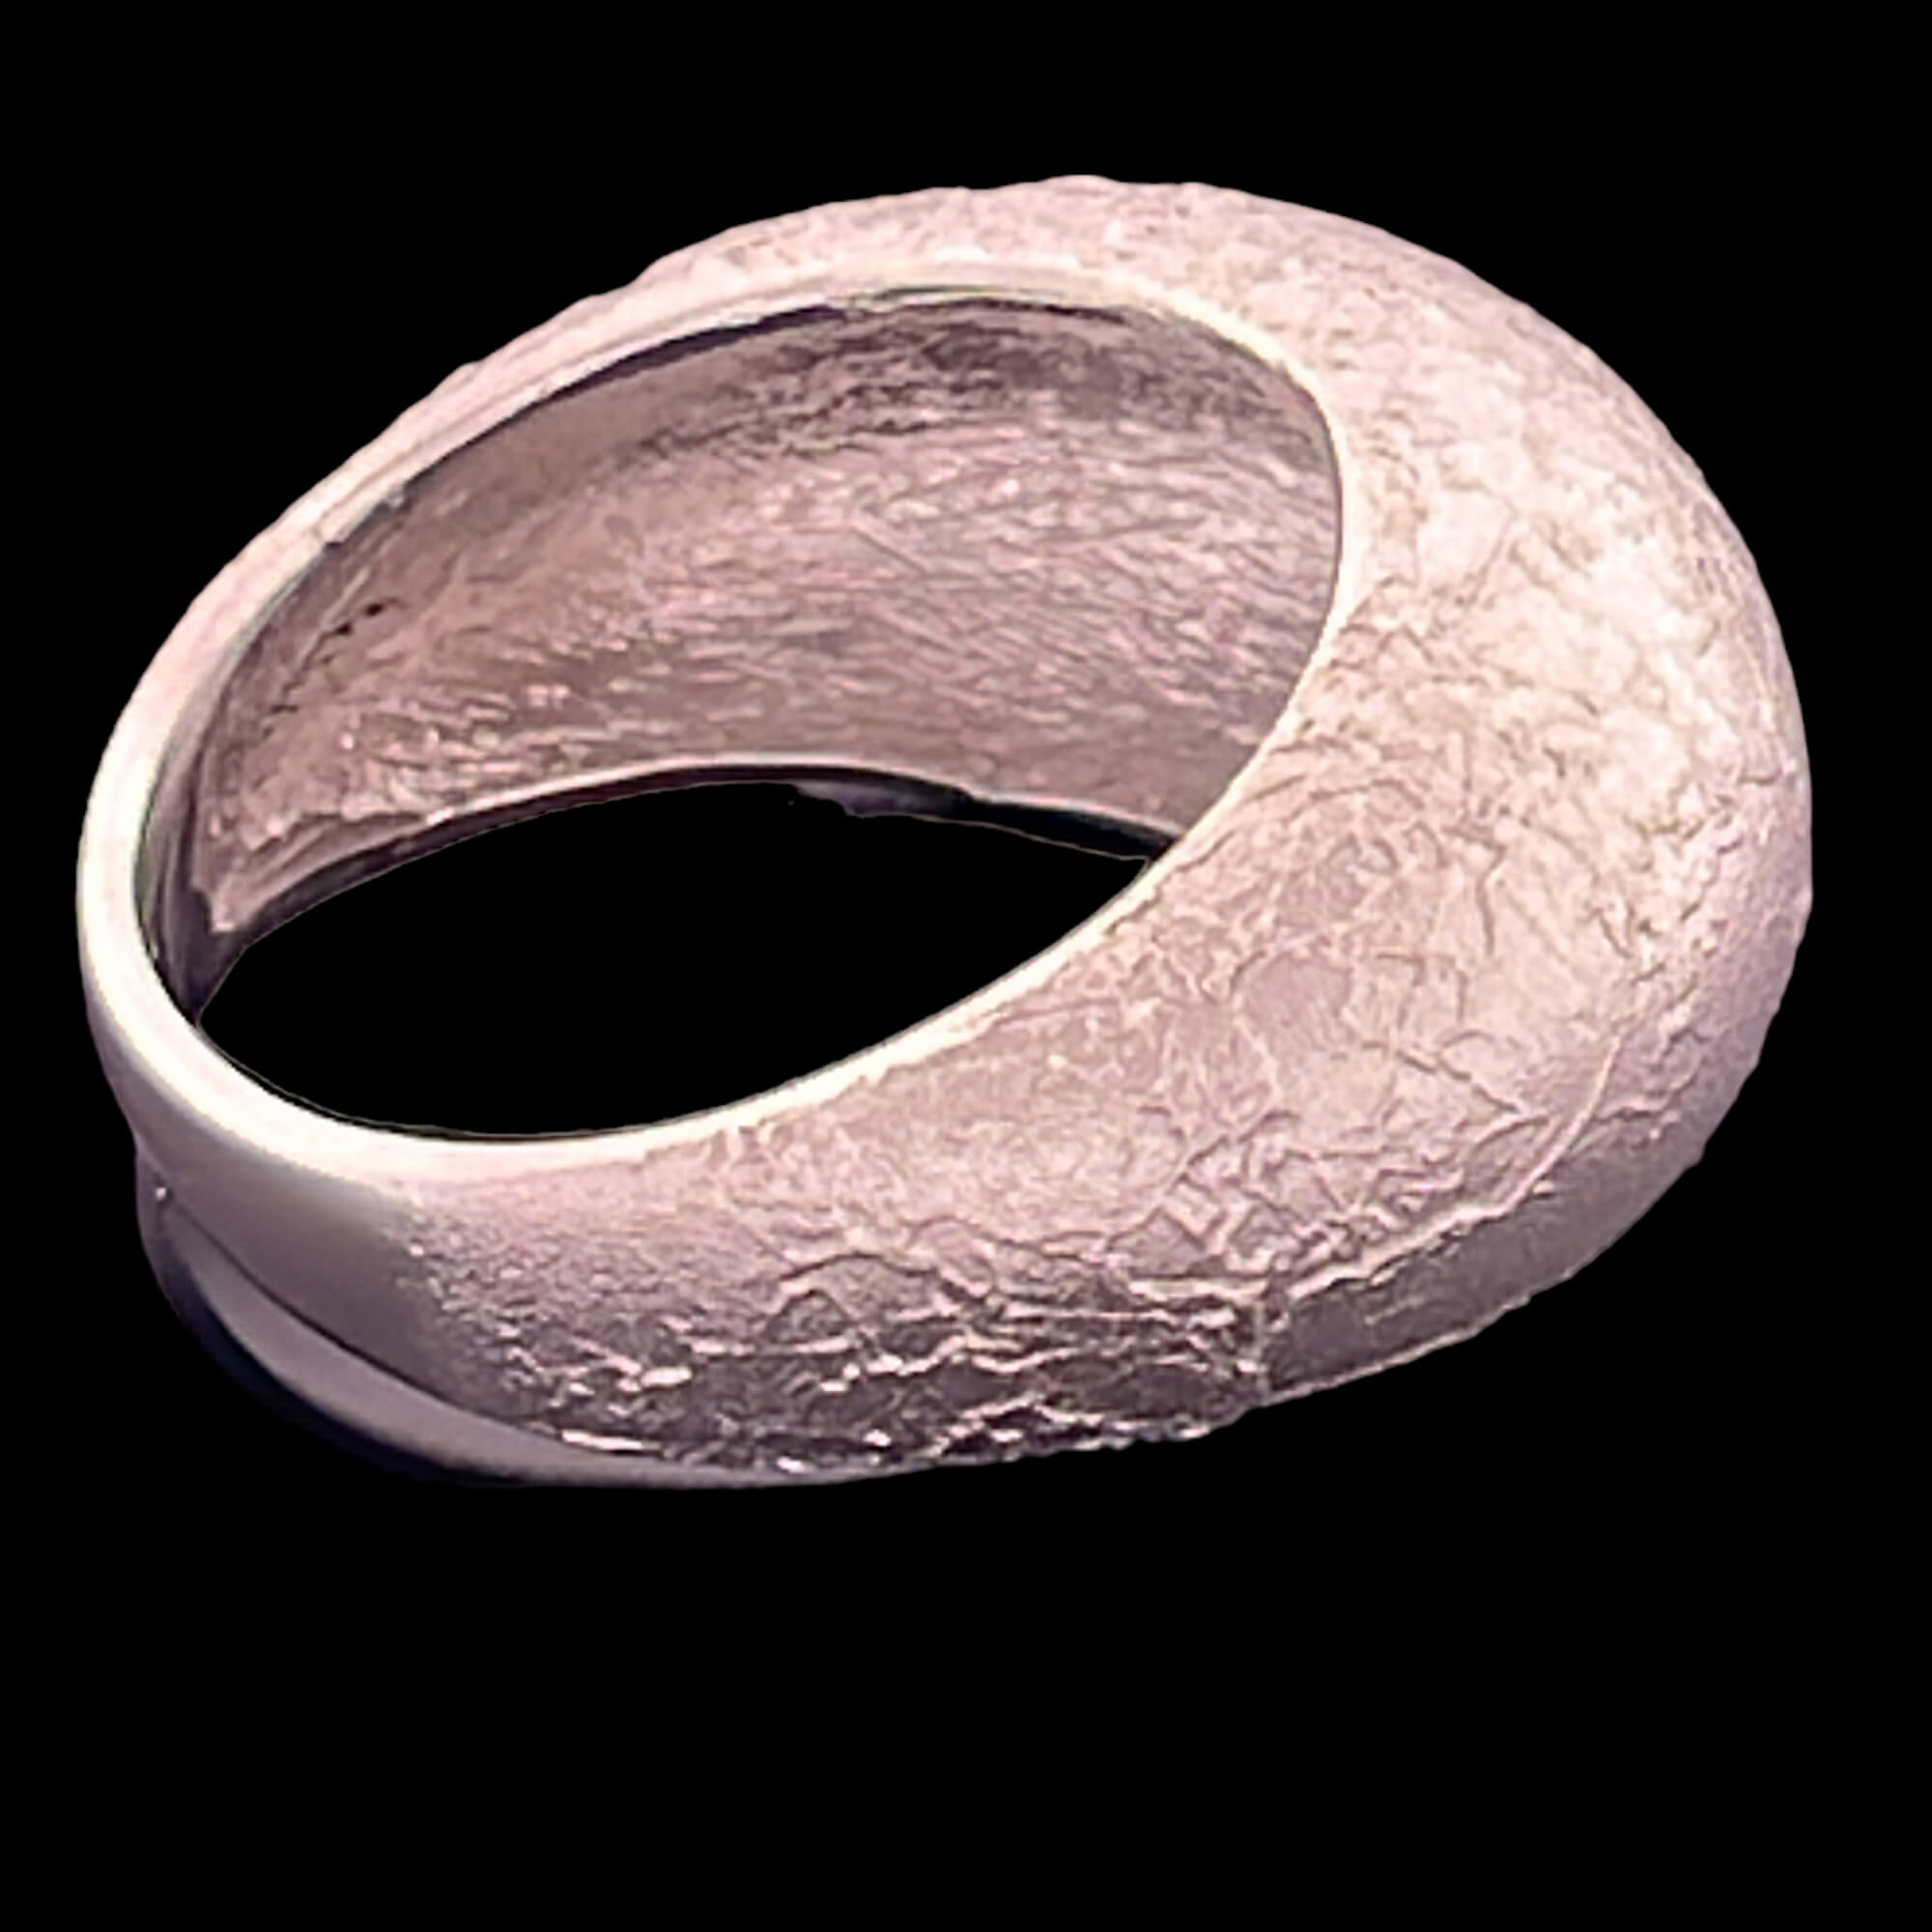 Processed silver and matte ring